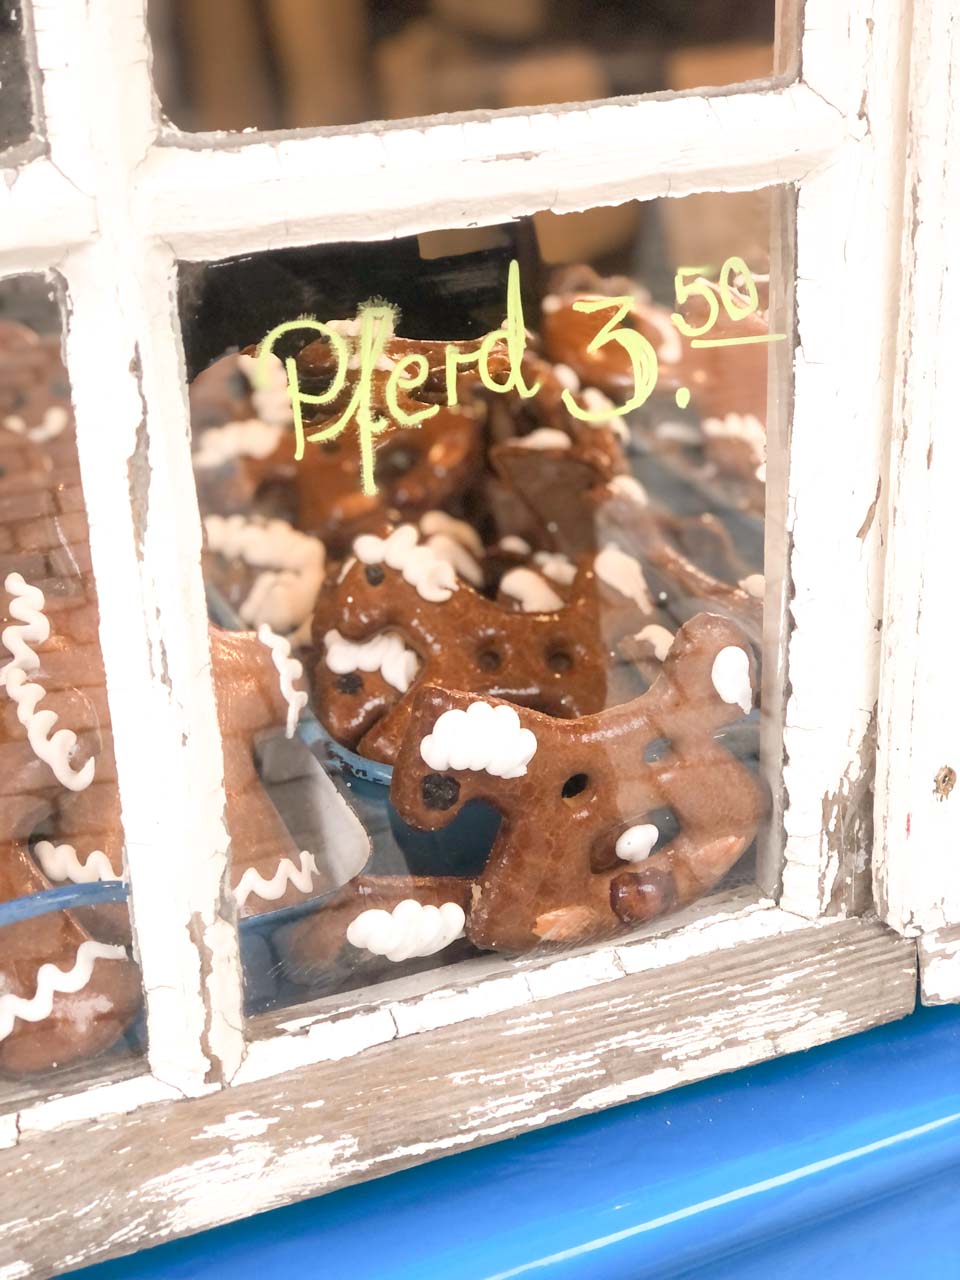 A close-up of a quaint shop window at the Nuremberg Christmas Market, displaying traditional gingerbread horses (Lebkuchen Pferd) with white icing